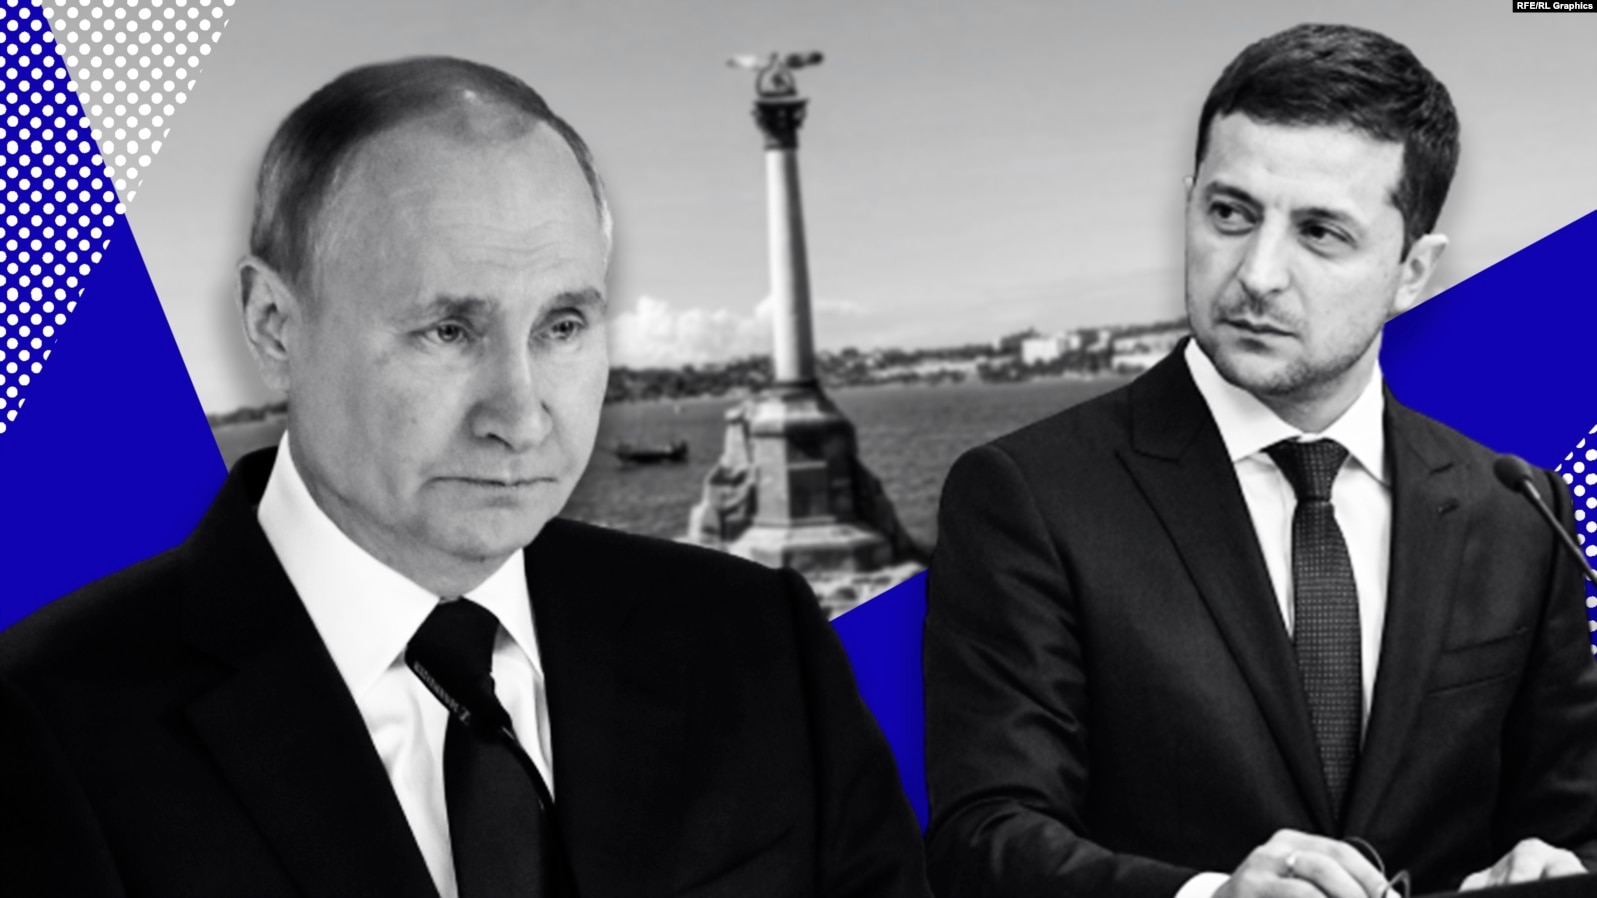 Vladimir Putin and Volodymyr Zelenskyy over a photograph of the Monument to the Sunken Ships in the city of Sevastopol on Russia-occupied Crimea (Collage by RFE/RL Graphics)